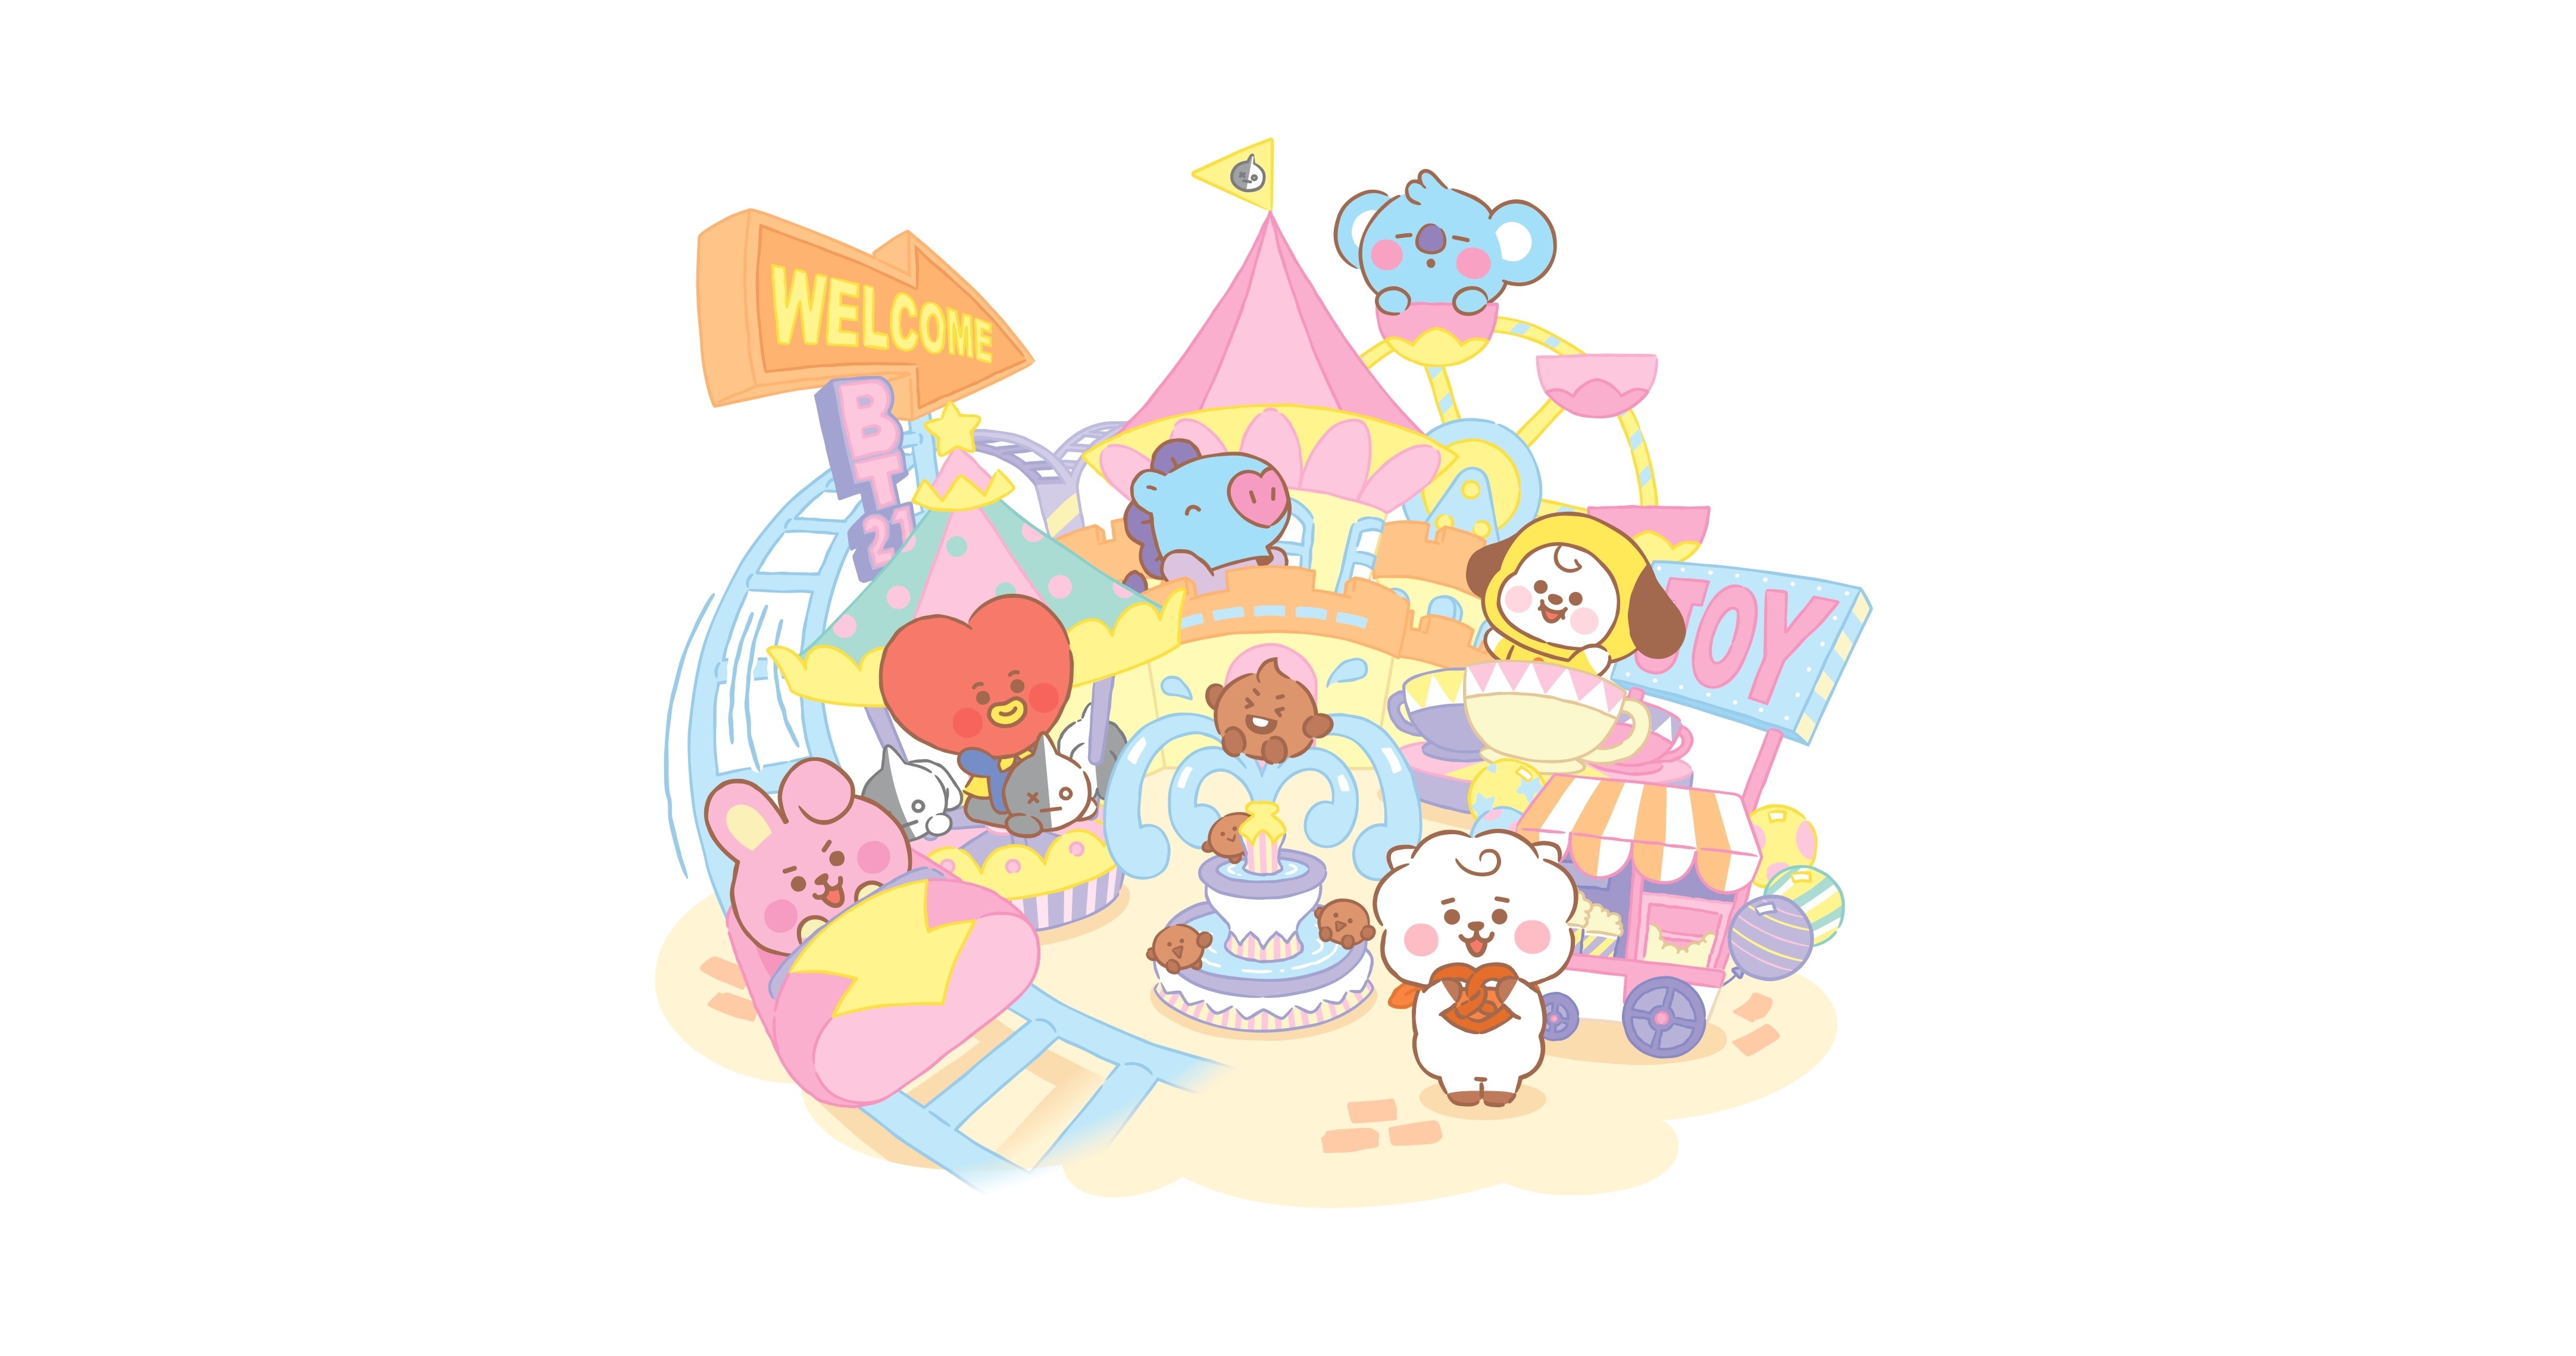 「BT21 MerryLand ～Welcome to our dreamy world!～ 」1